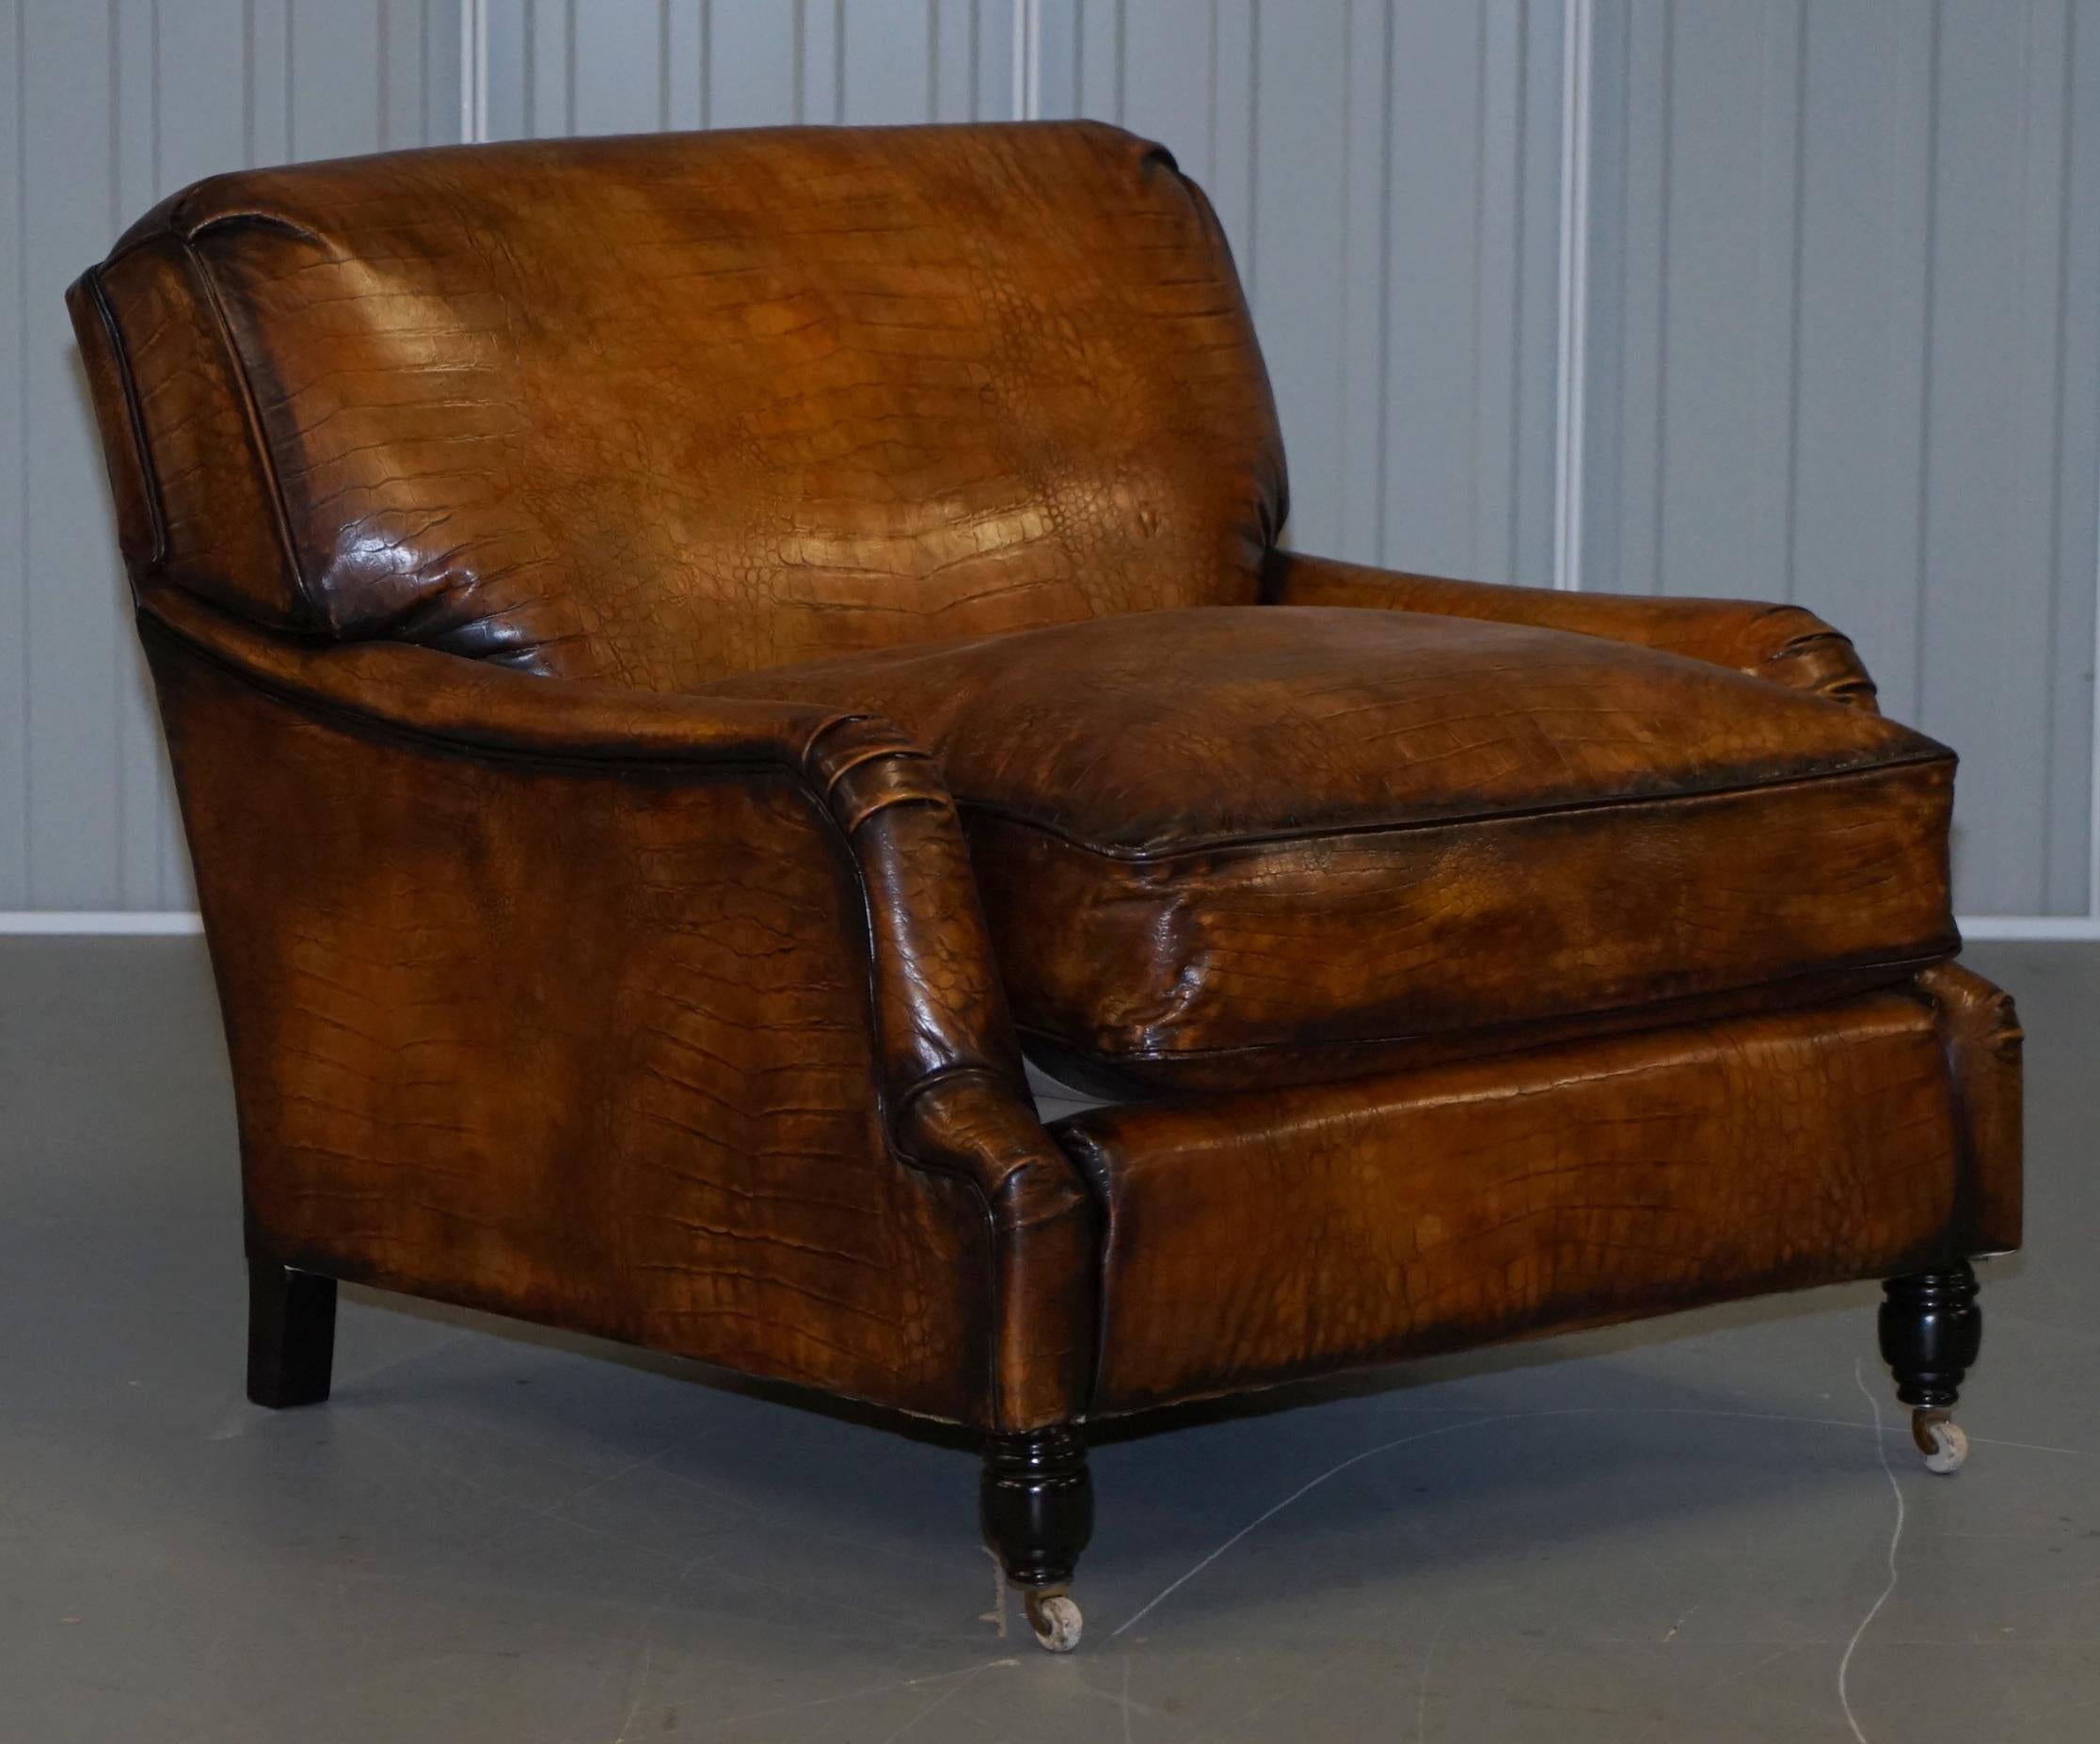 We are delighted to offer for sale this stunning exceptionally rare Howard style Crocodile Alligator leather patina club armchairs with overstuffed feather filled cushion

A very rare chair, you almost never come across this kind of leather